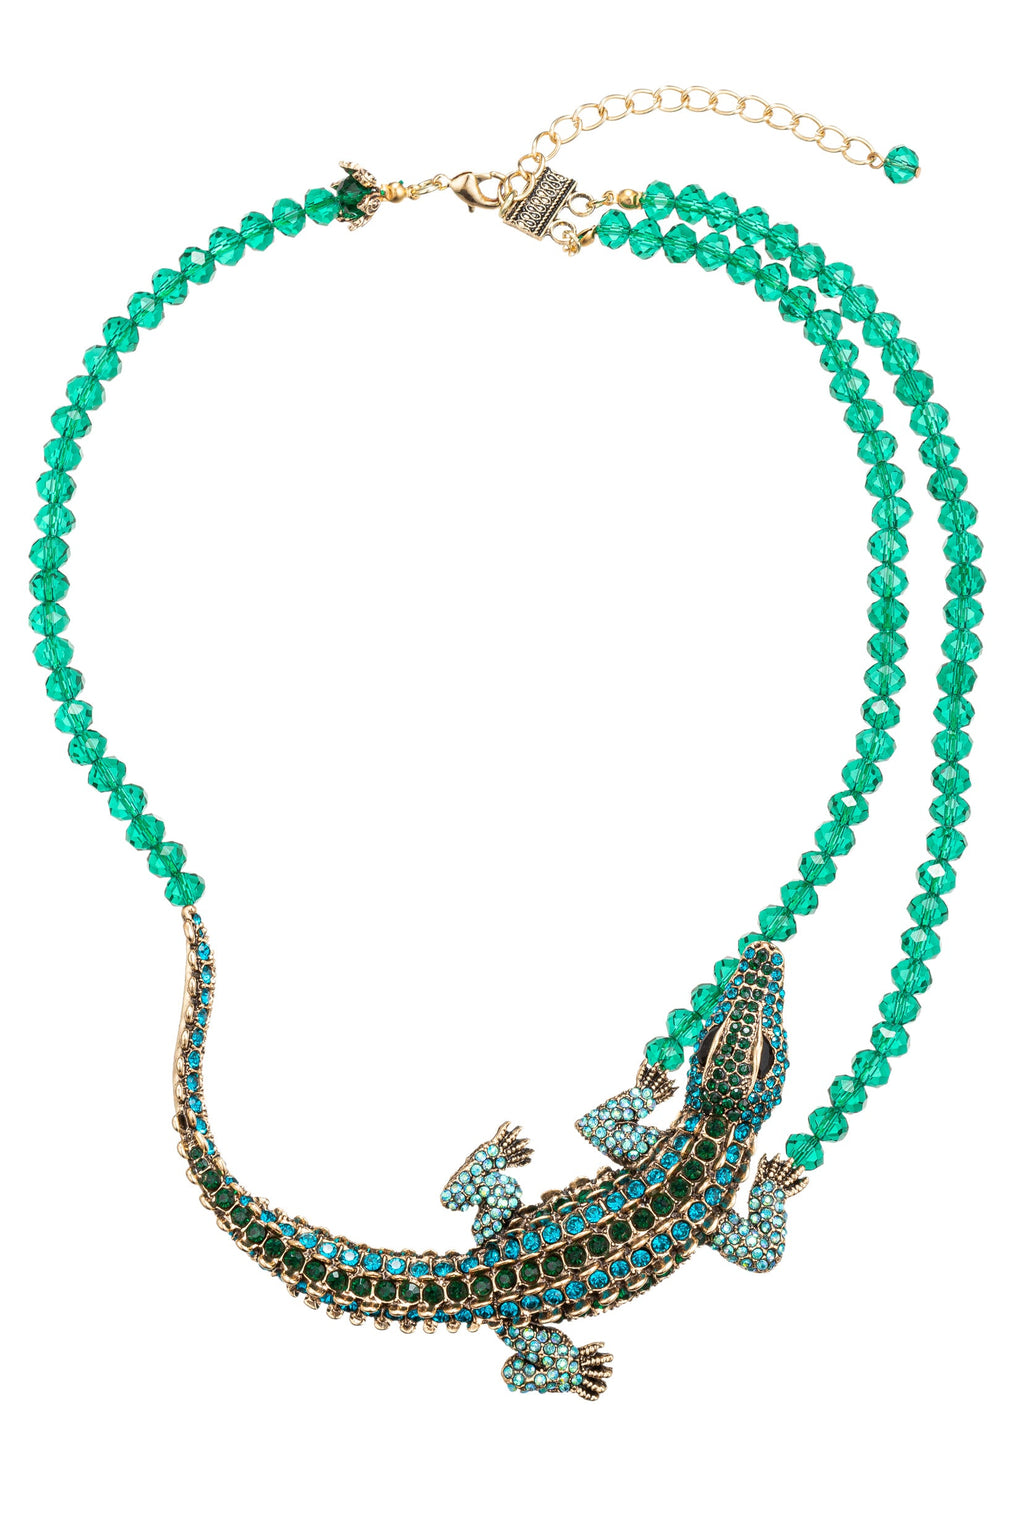 Later Gator Beaded necklace